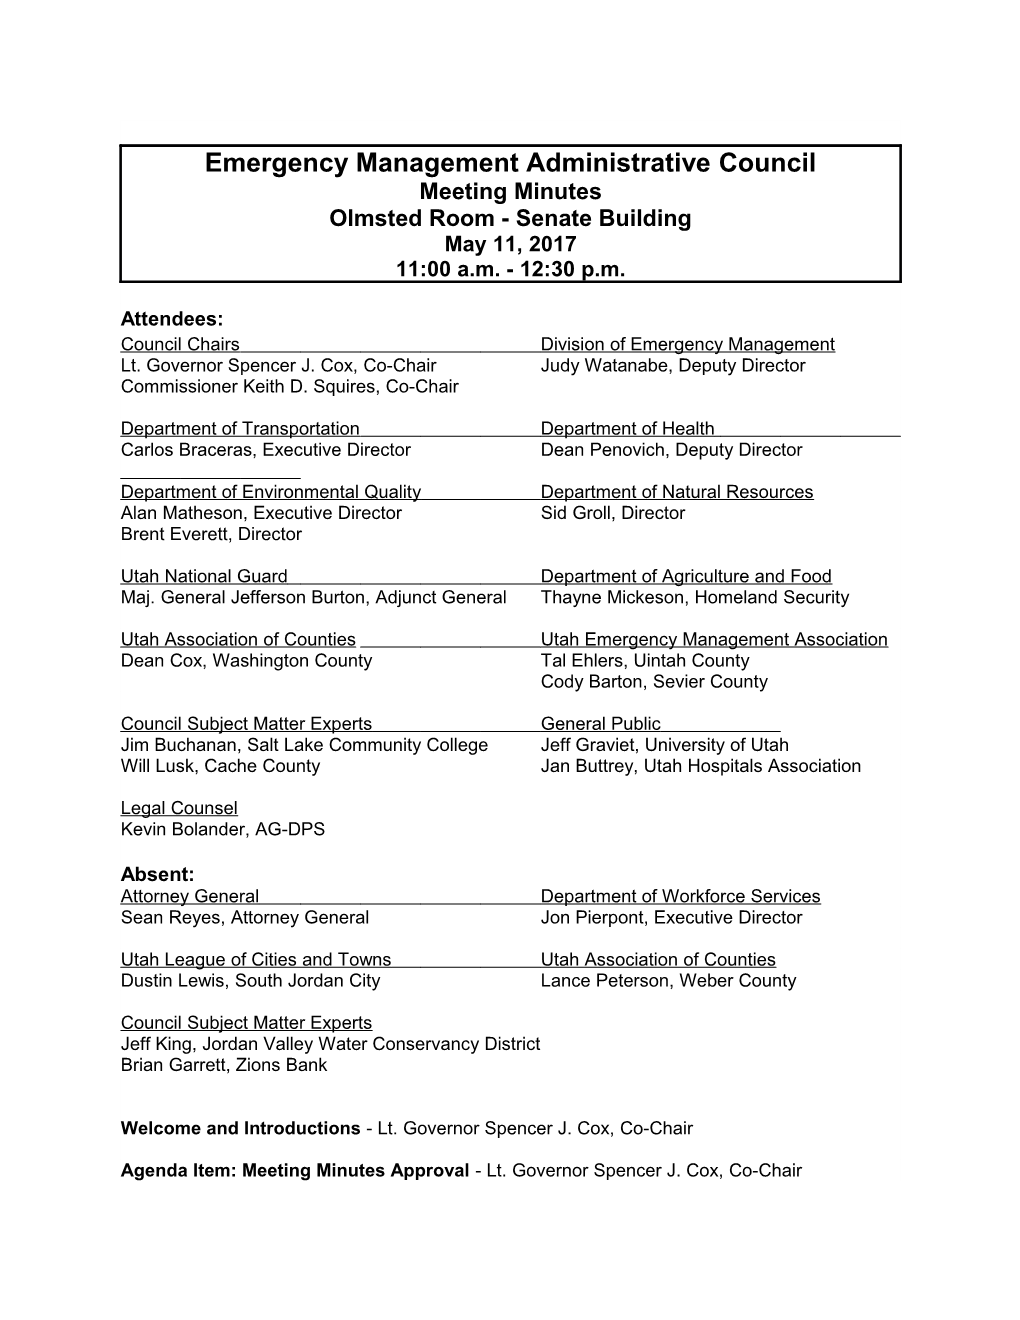 Council Chairsdivision of Emergency Management